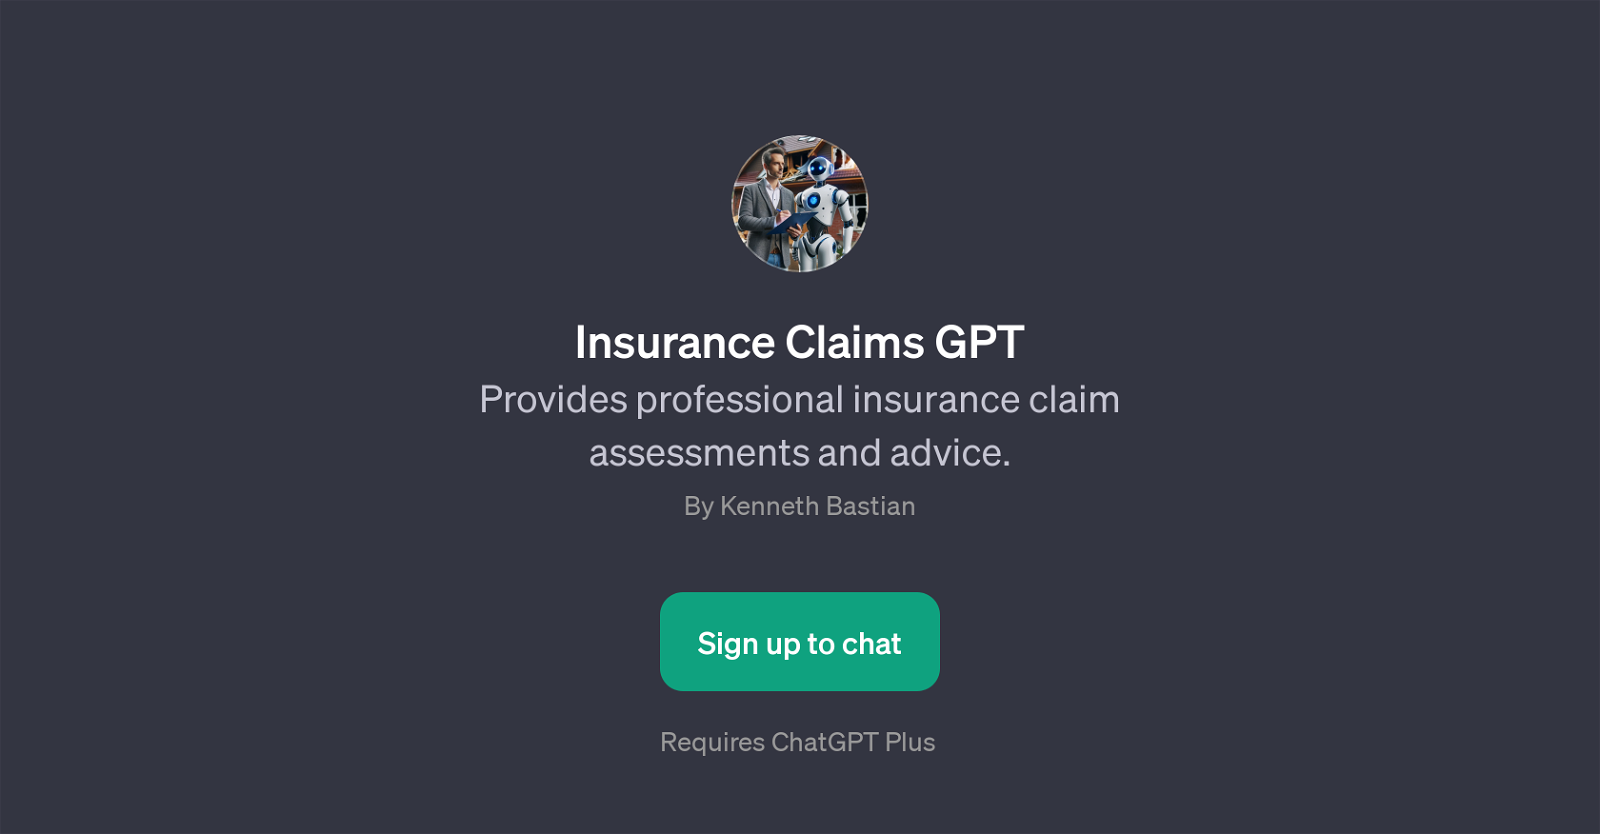 Insurance Claims GPT website